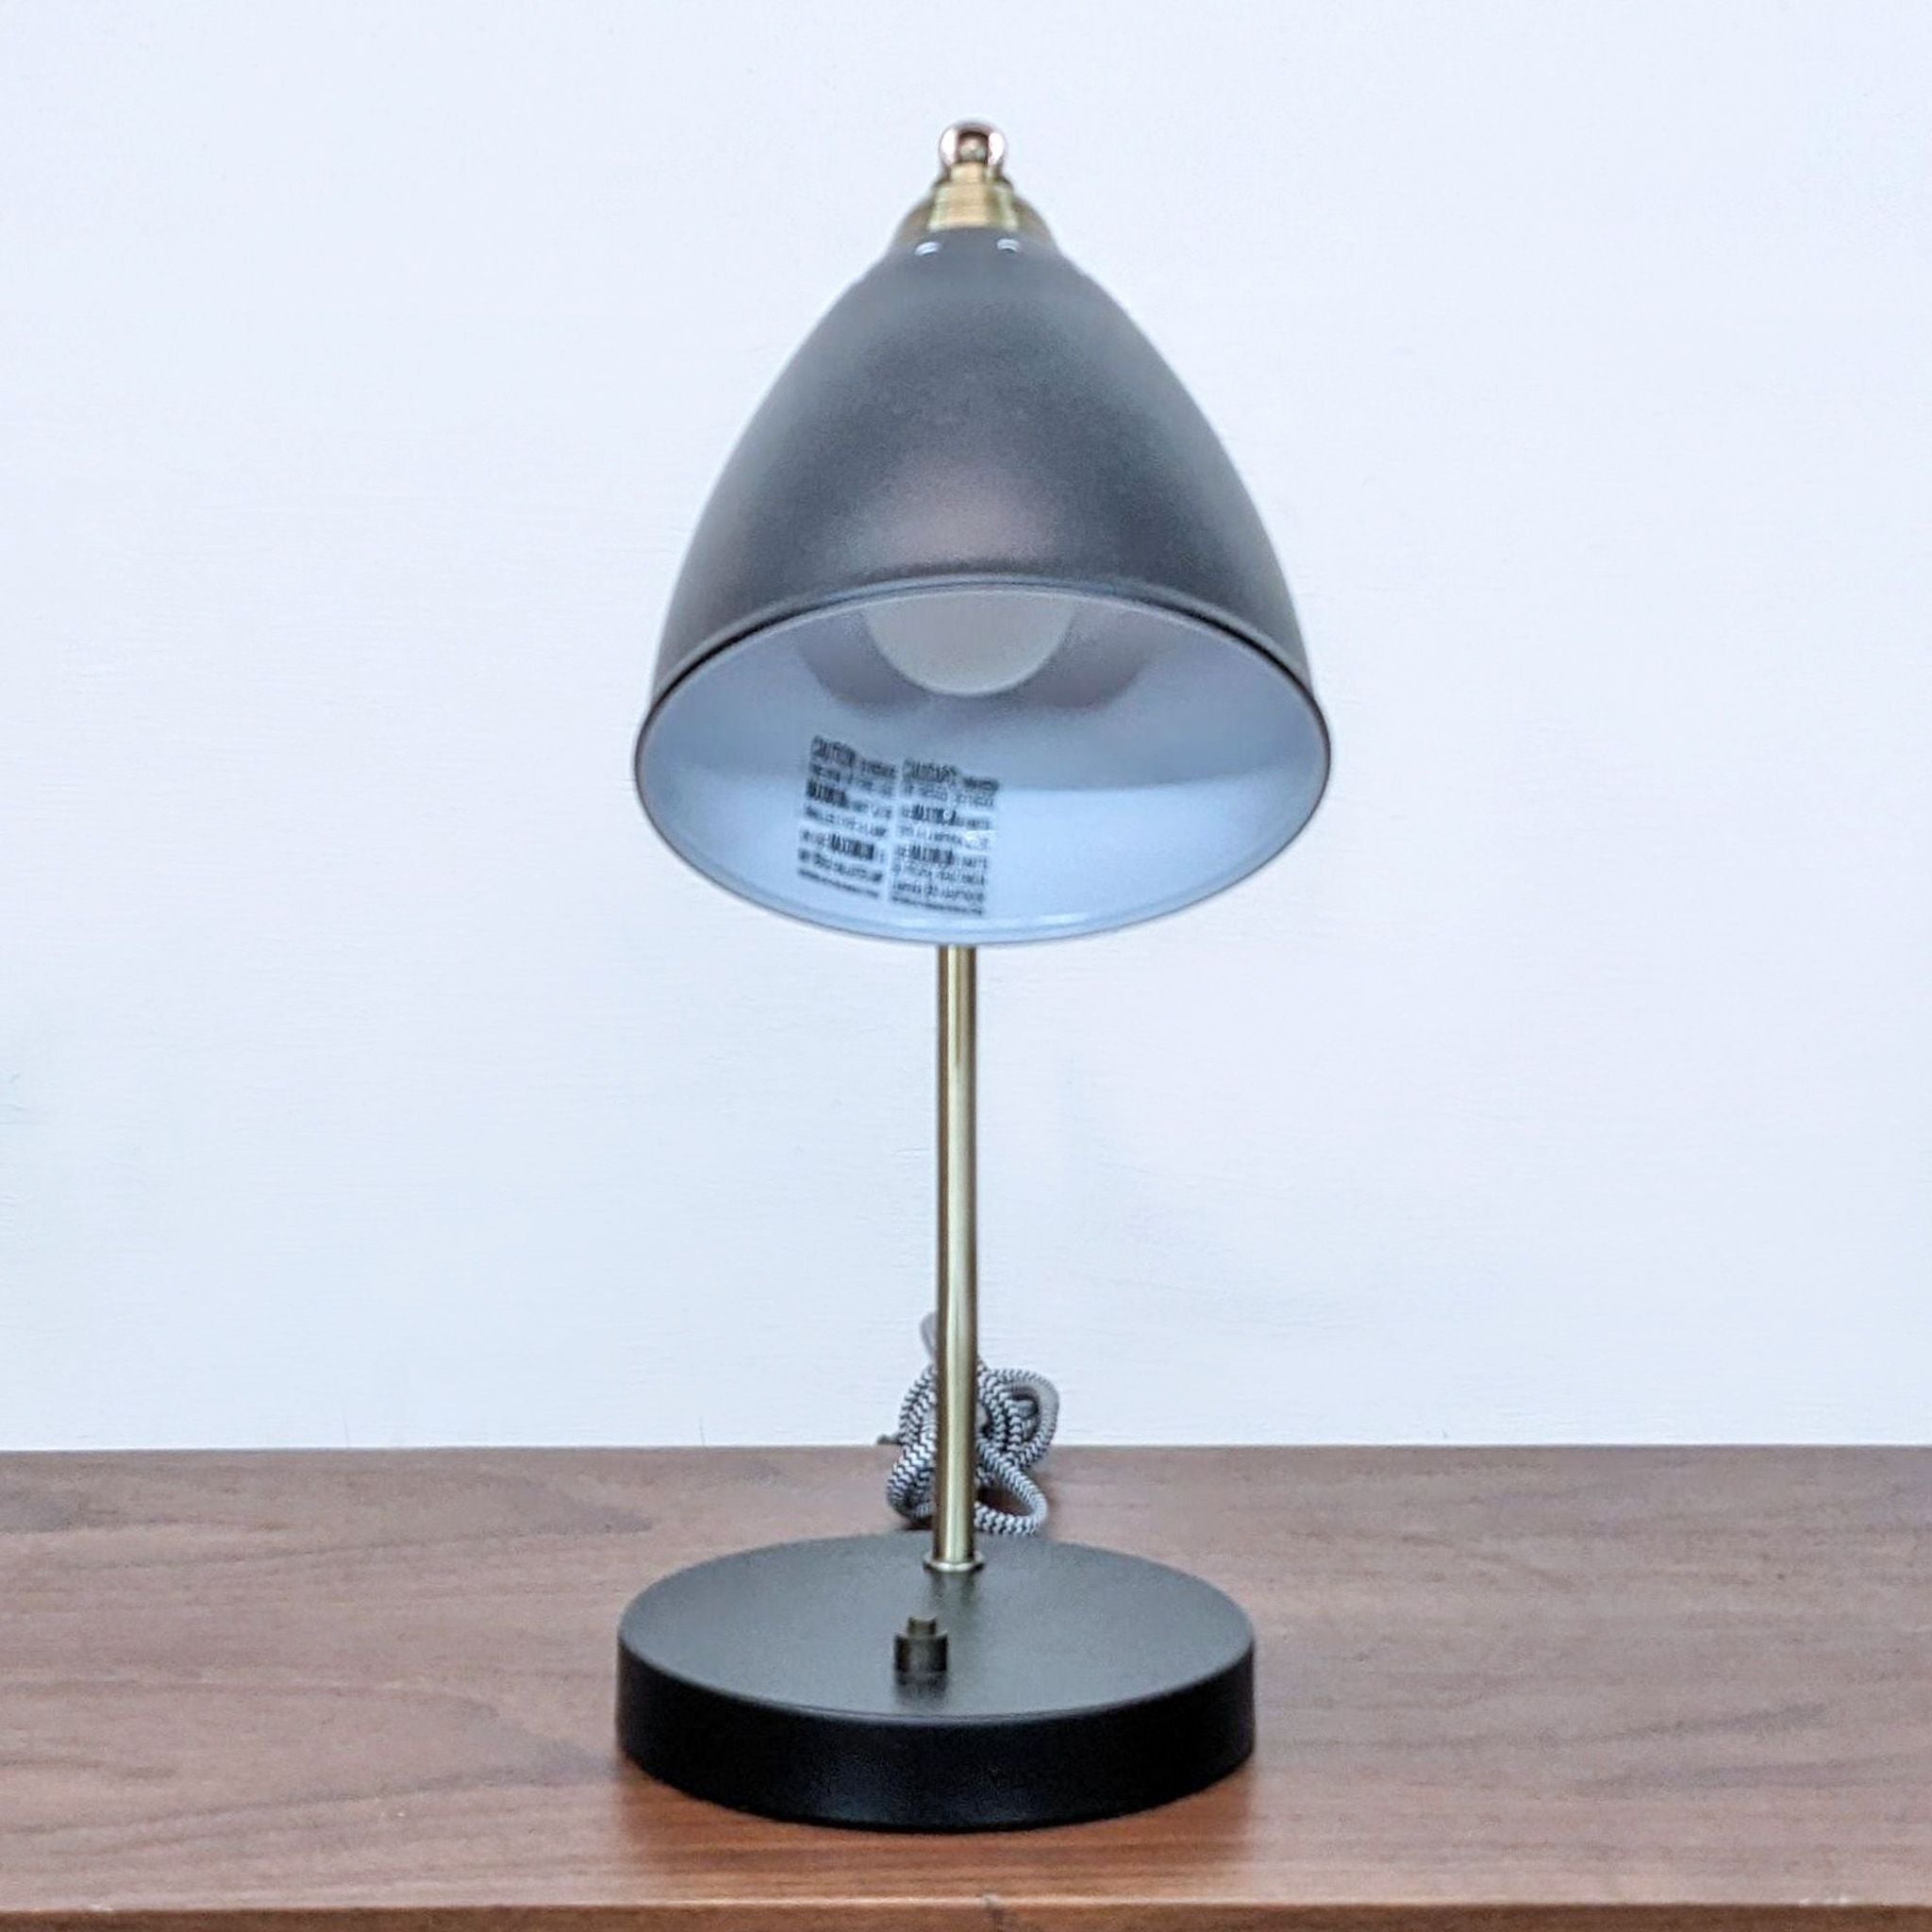 Reperch brand desk lamp with angled brass stand and gray shade, illuminated interior visible, on a wooden surface.